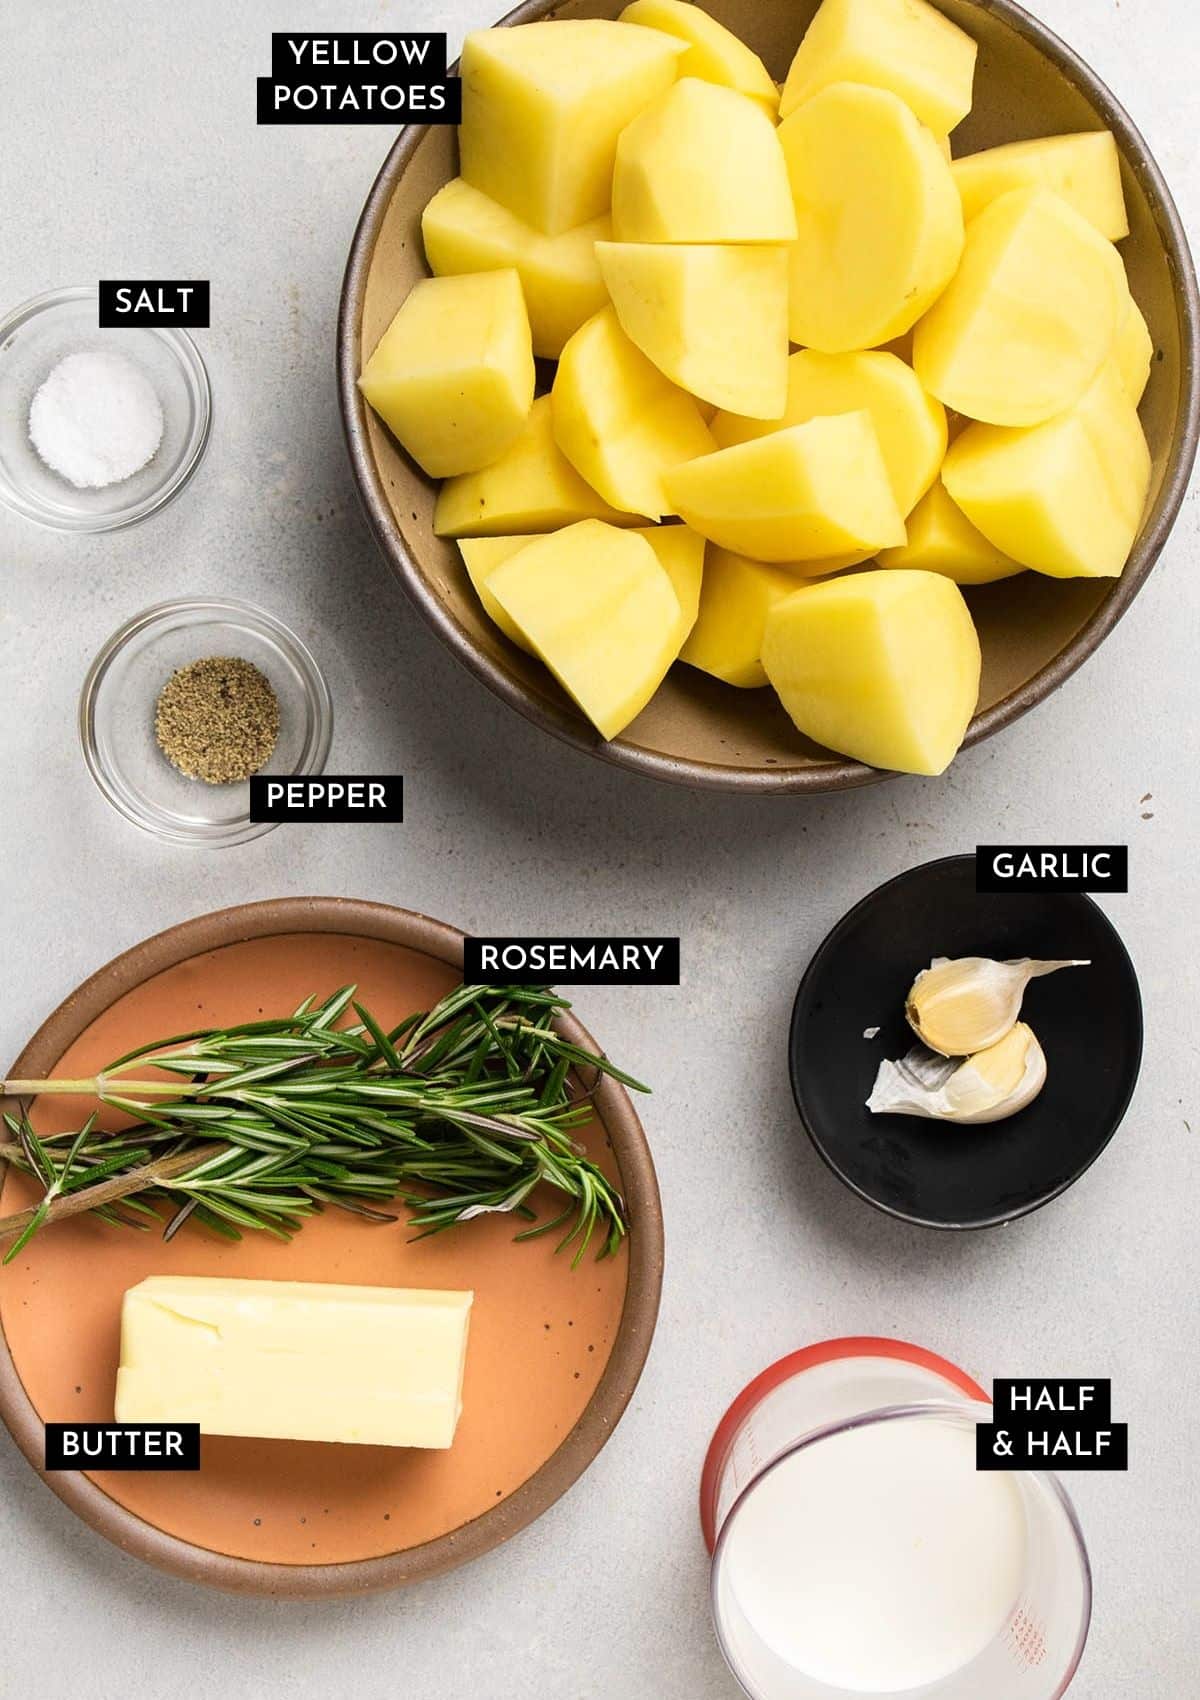 Recipe ingredients, prepped and measured into individual bowls.